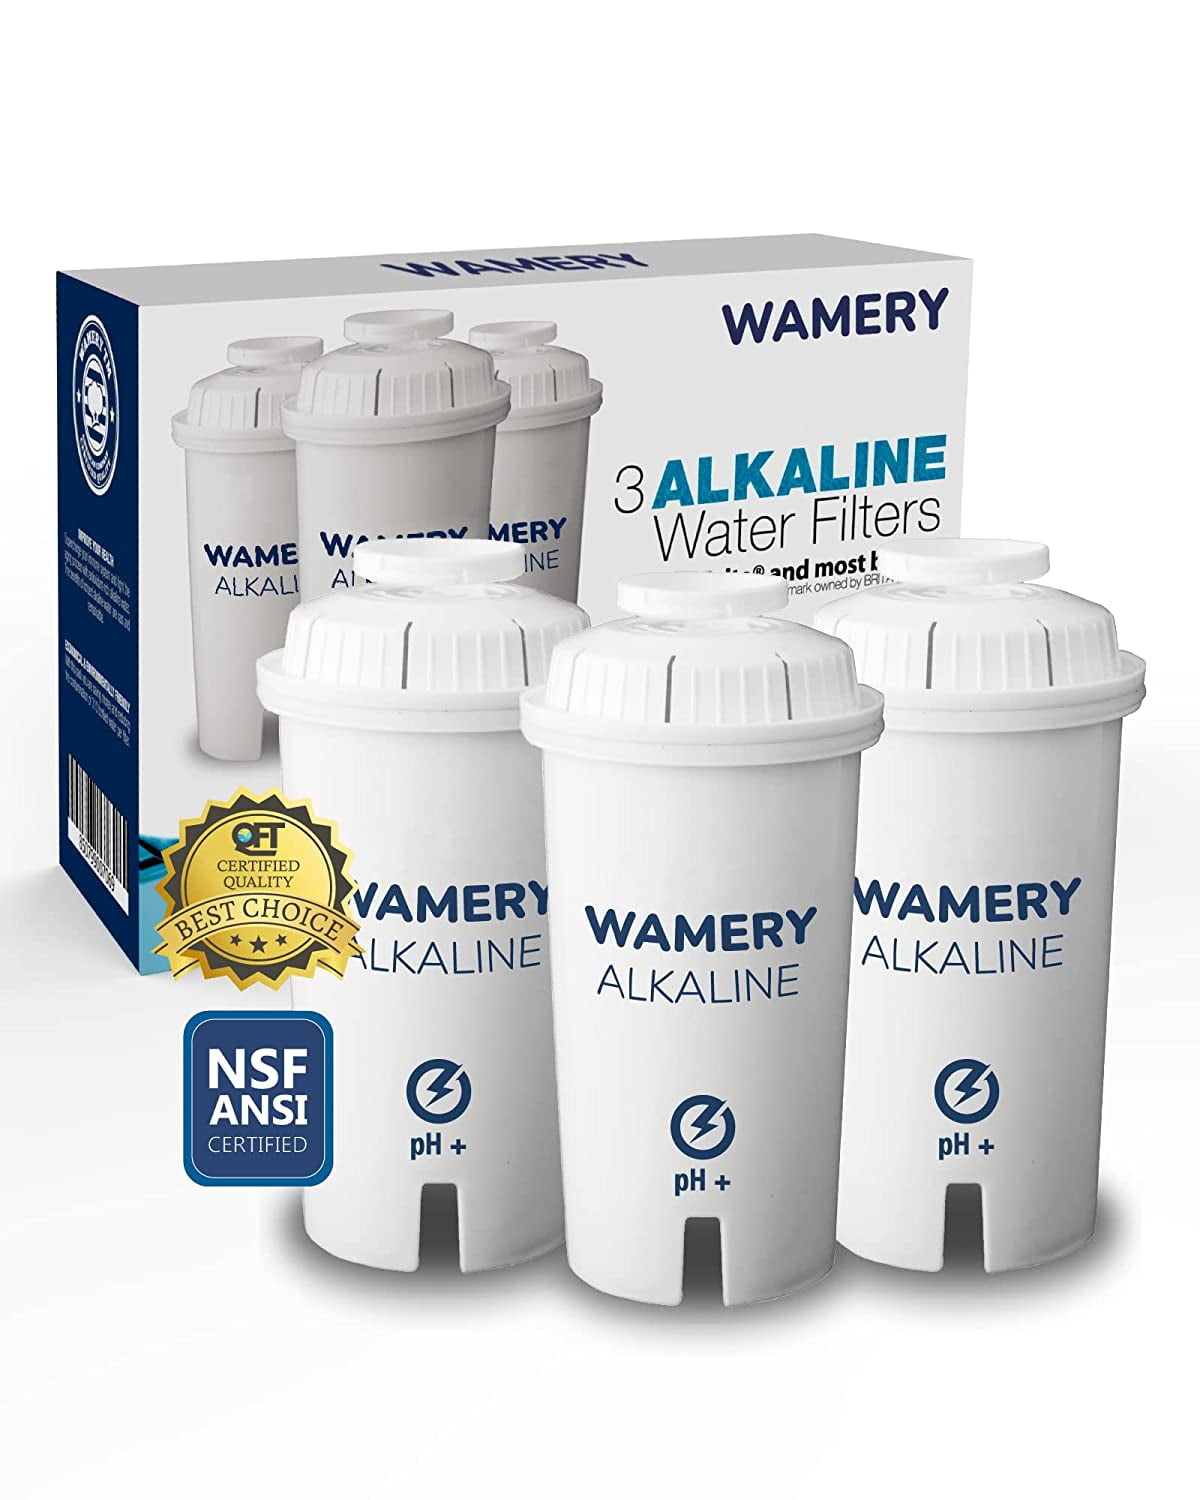 Certified Alkaline Water Filter 3-Pack Water Filter Cartridges Replacement Fits On Wamery & Brita Classic Jug Increase Ph Water Ionize & Purifier Hard Water Reduce Chloride Lead from Kitchen Faucet. 